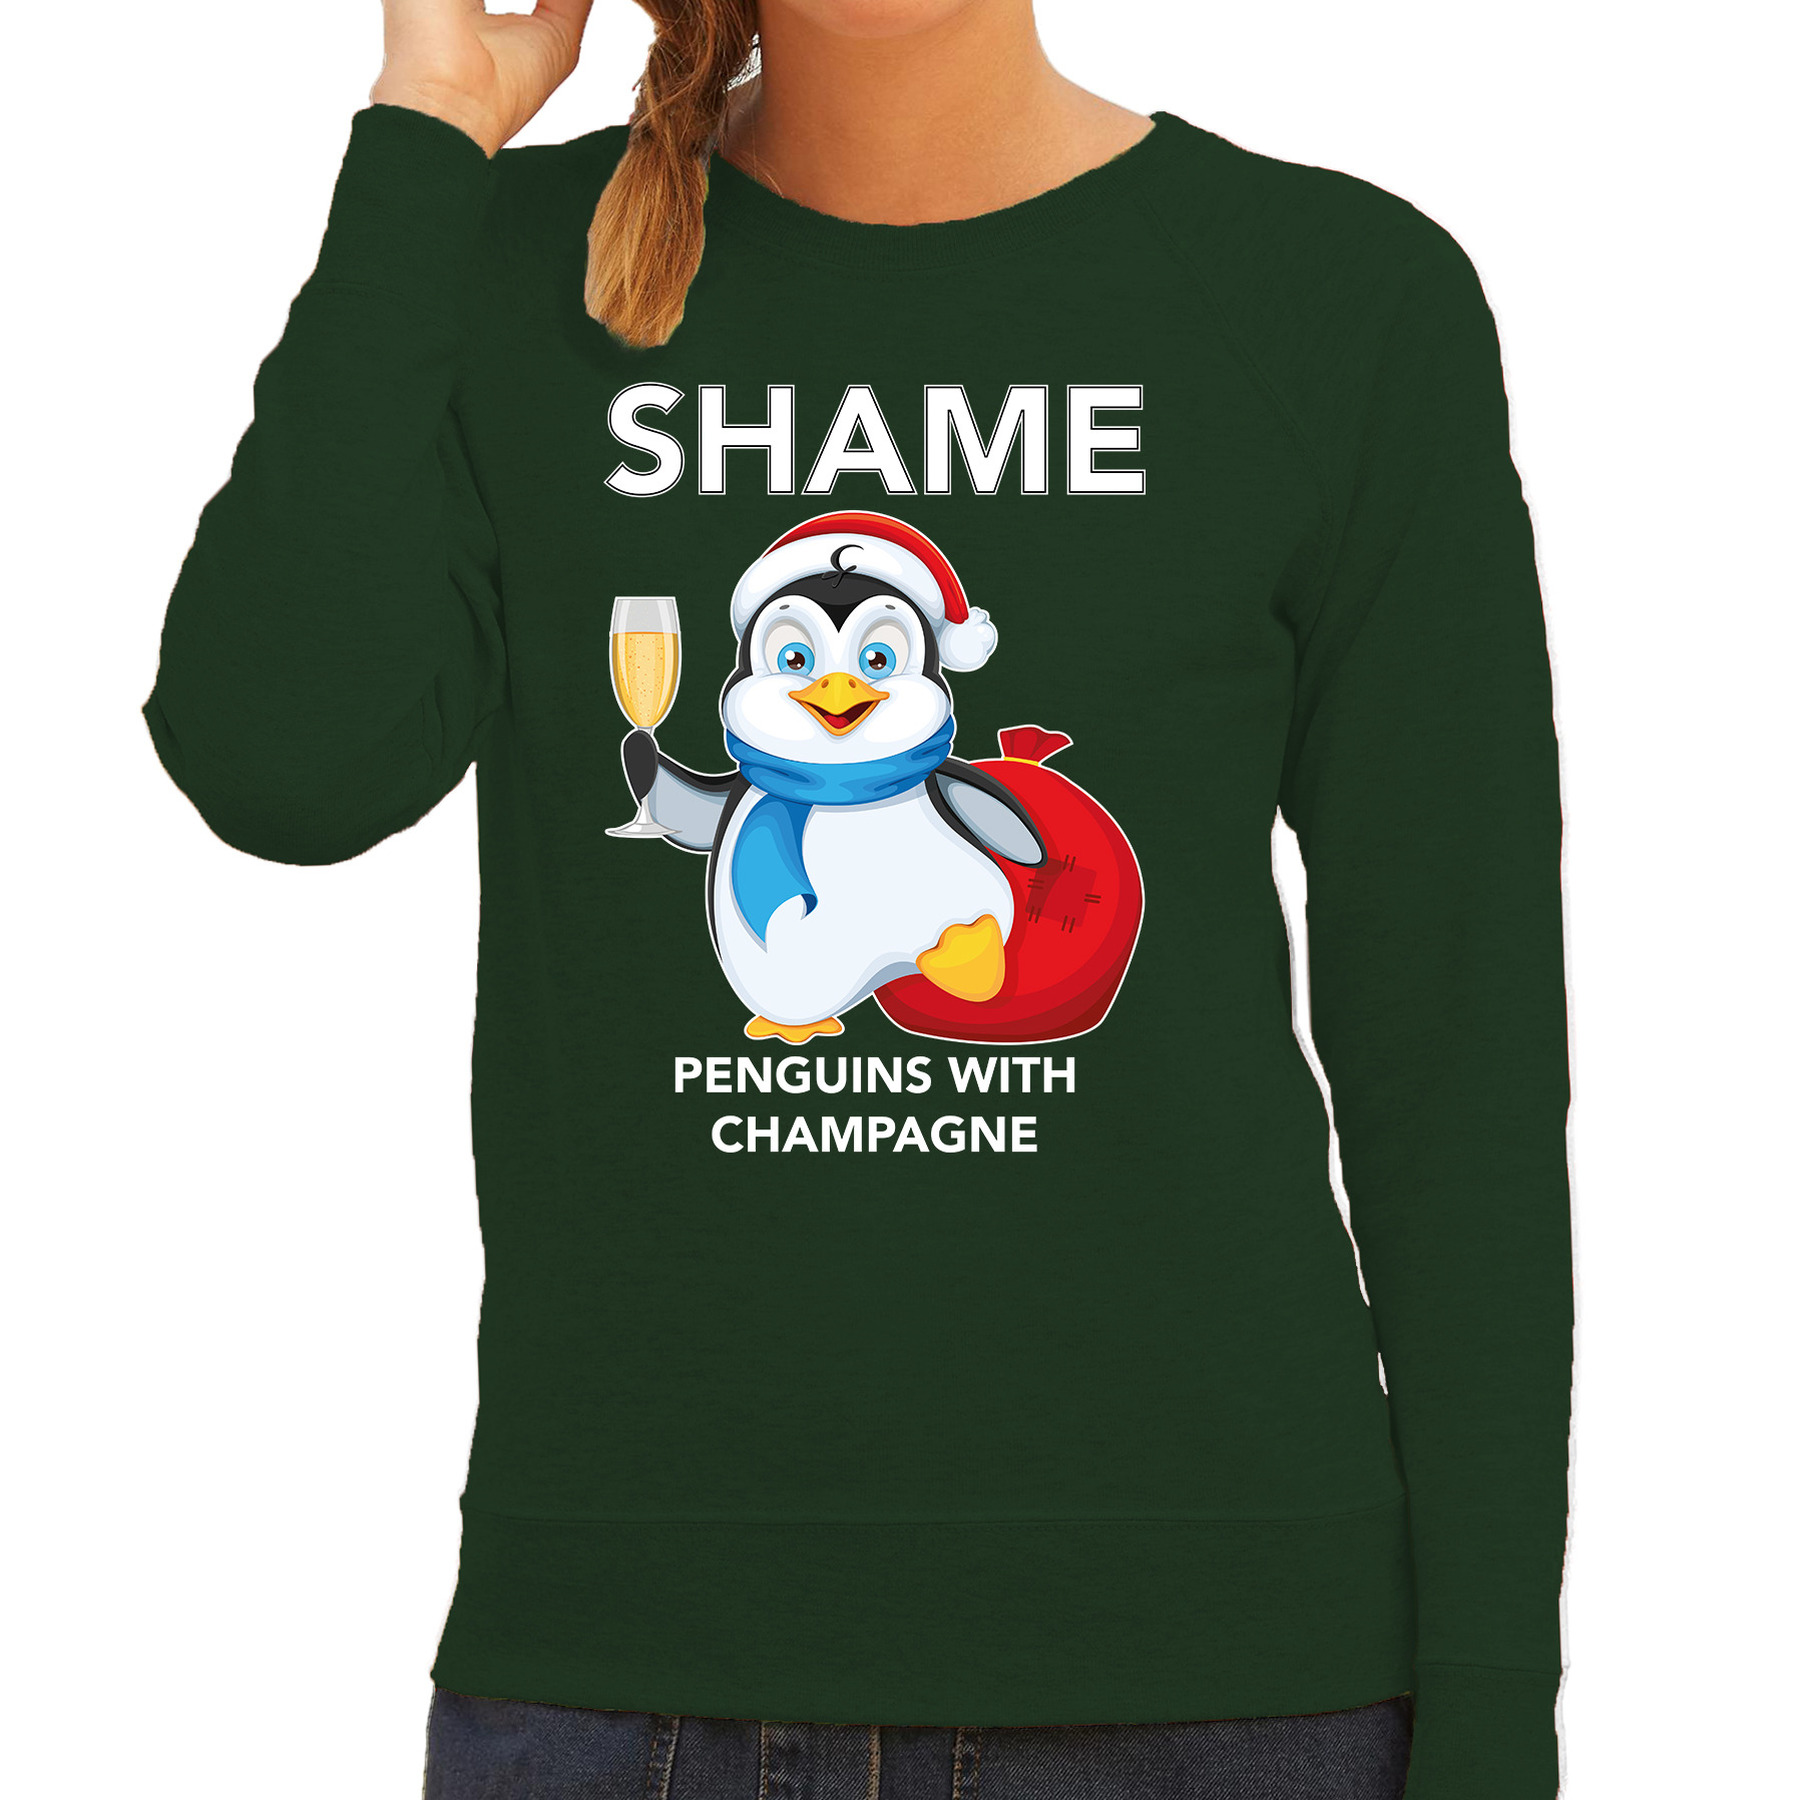 Pinguin Kerstsweater-outfit Shame penguins with champagne groen voor dames